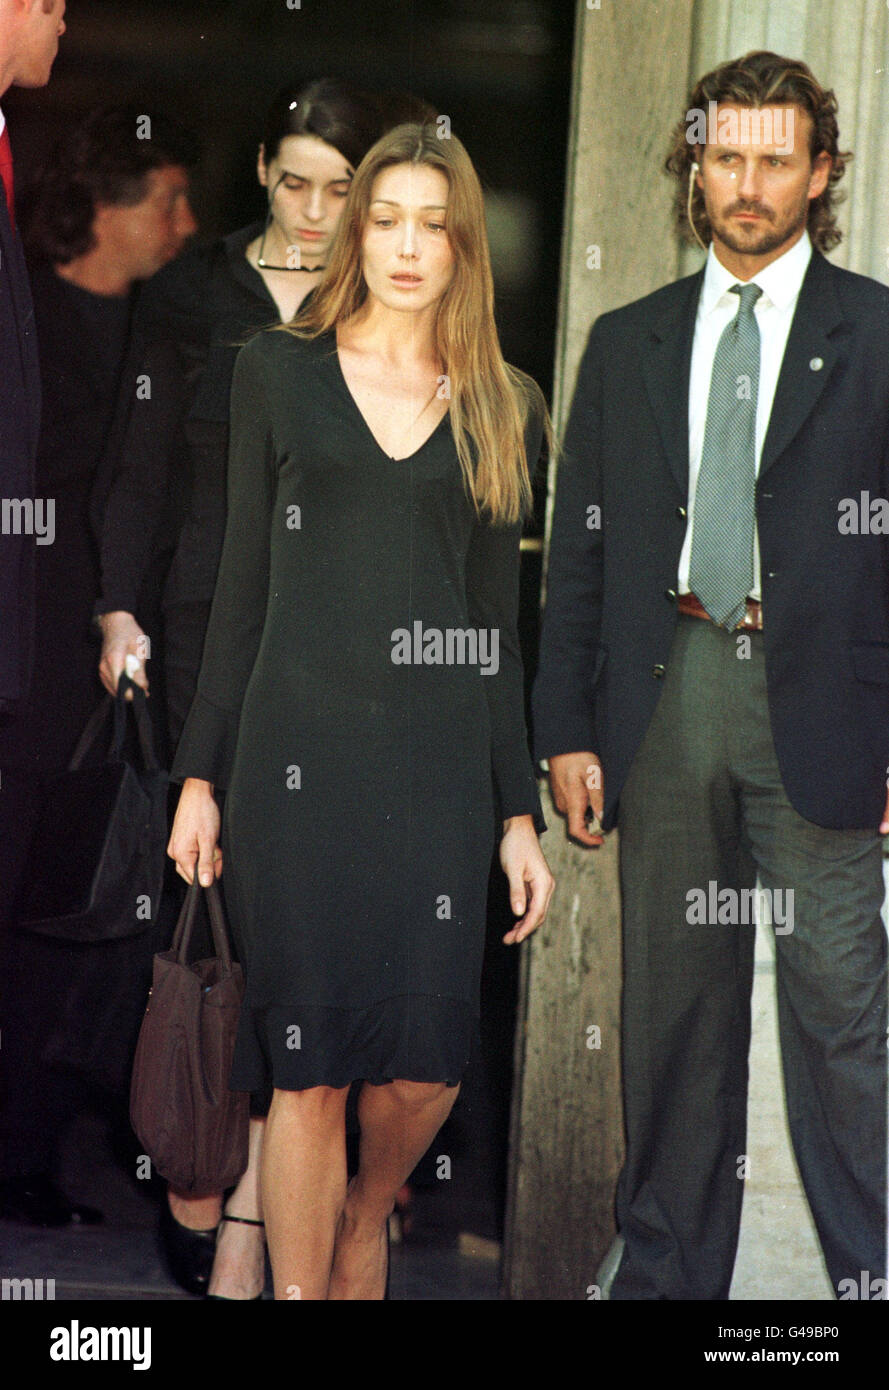 Carla Bruni attends the memorial service held for the designer Gianni Versace who was murdered outside his home in Florida, after being shot in the back of the head. The memorial service was held in Milan, Italy. Stock Photo